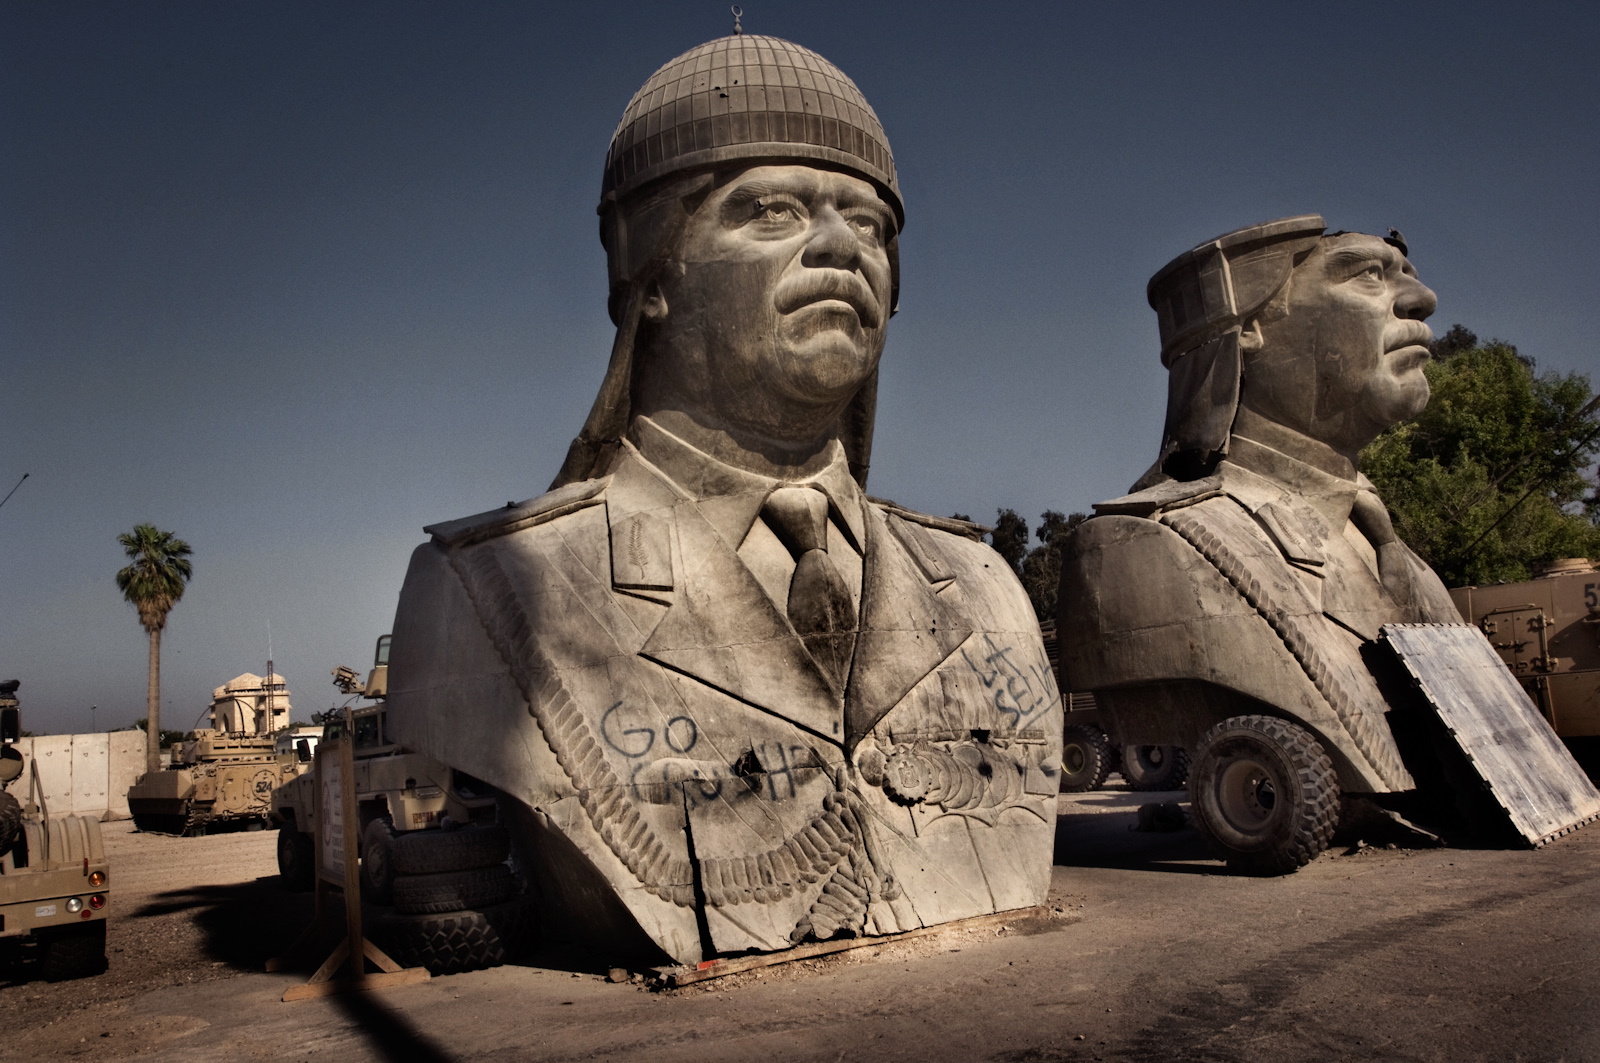 Large bronze heroic statues that once decorated Saddam Hussein's al Salam (peace palace) palace sits in ruins in Baghdad, Iraq, July 13, 2006.